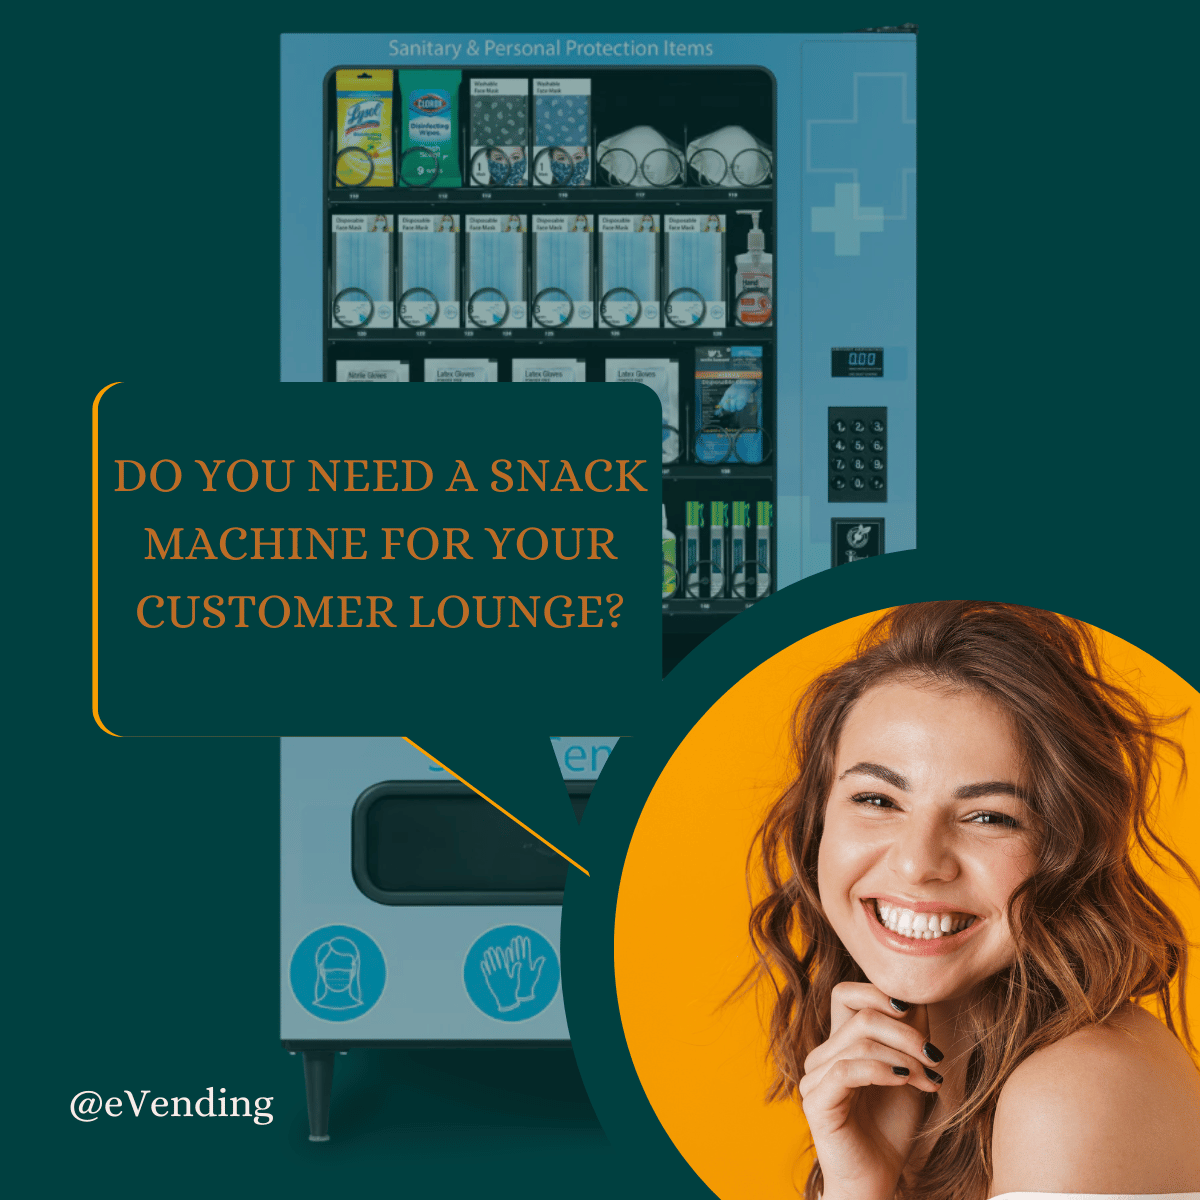 ARE YOU LOOKING FOR A VENDING MACHINE FOR YOUR CUSTOMER LOUNGE?